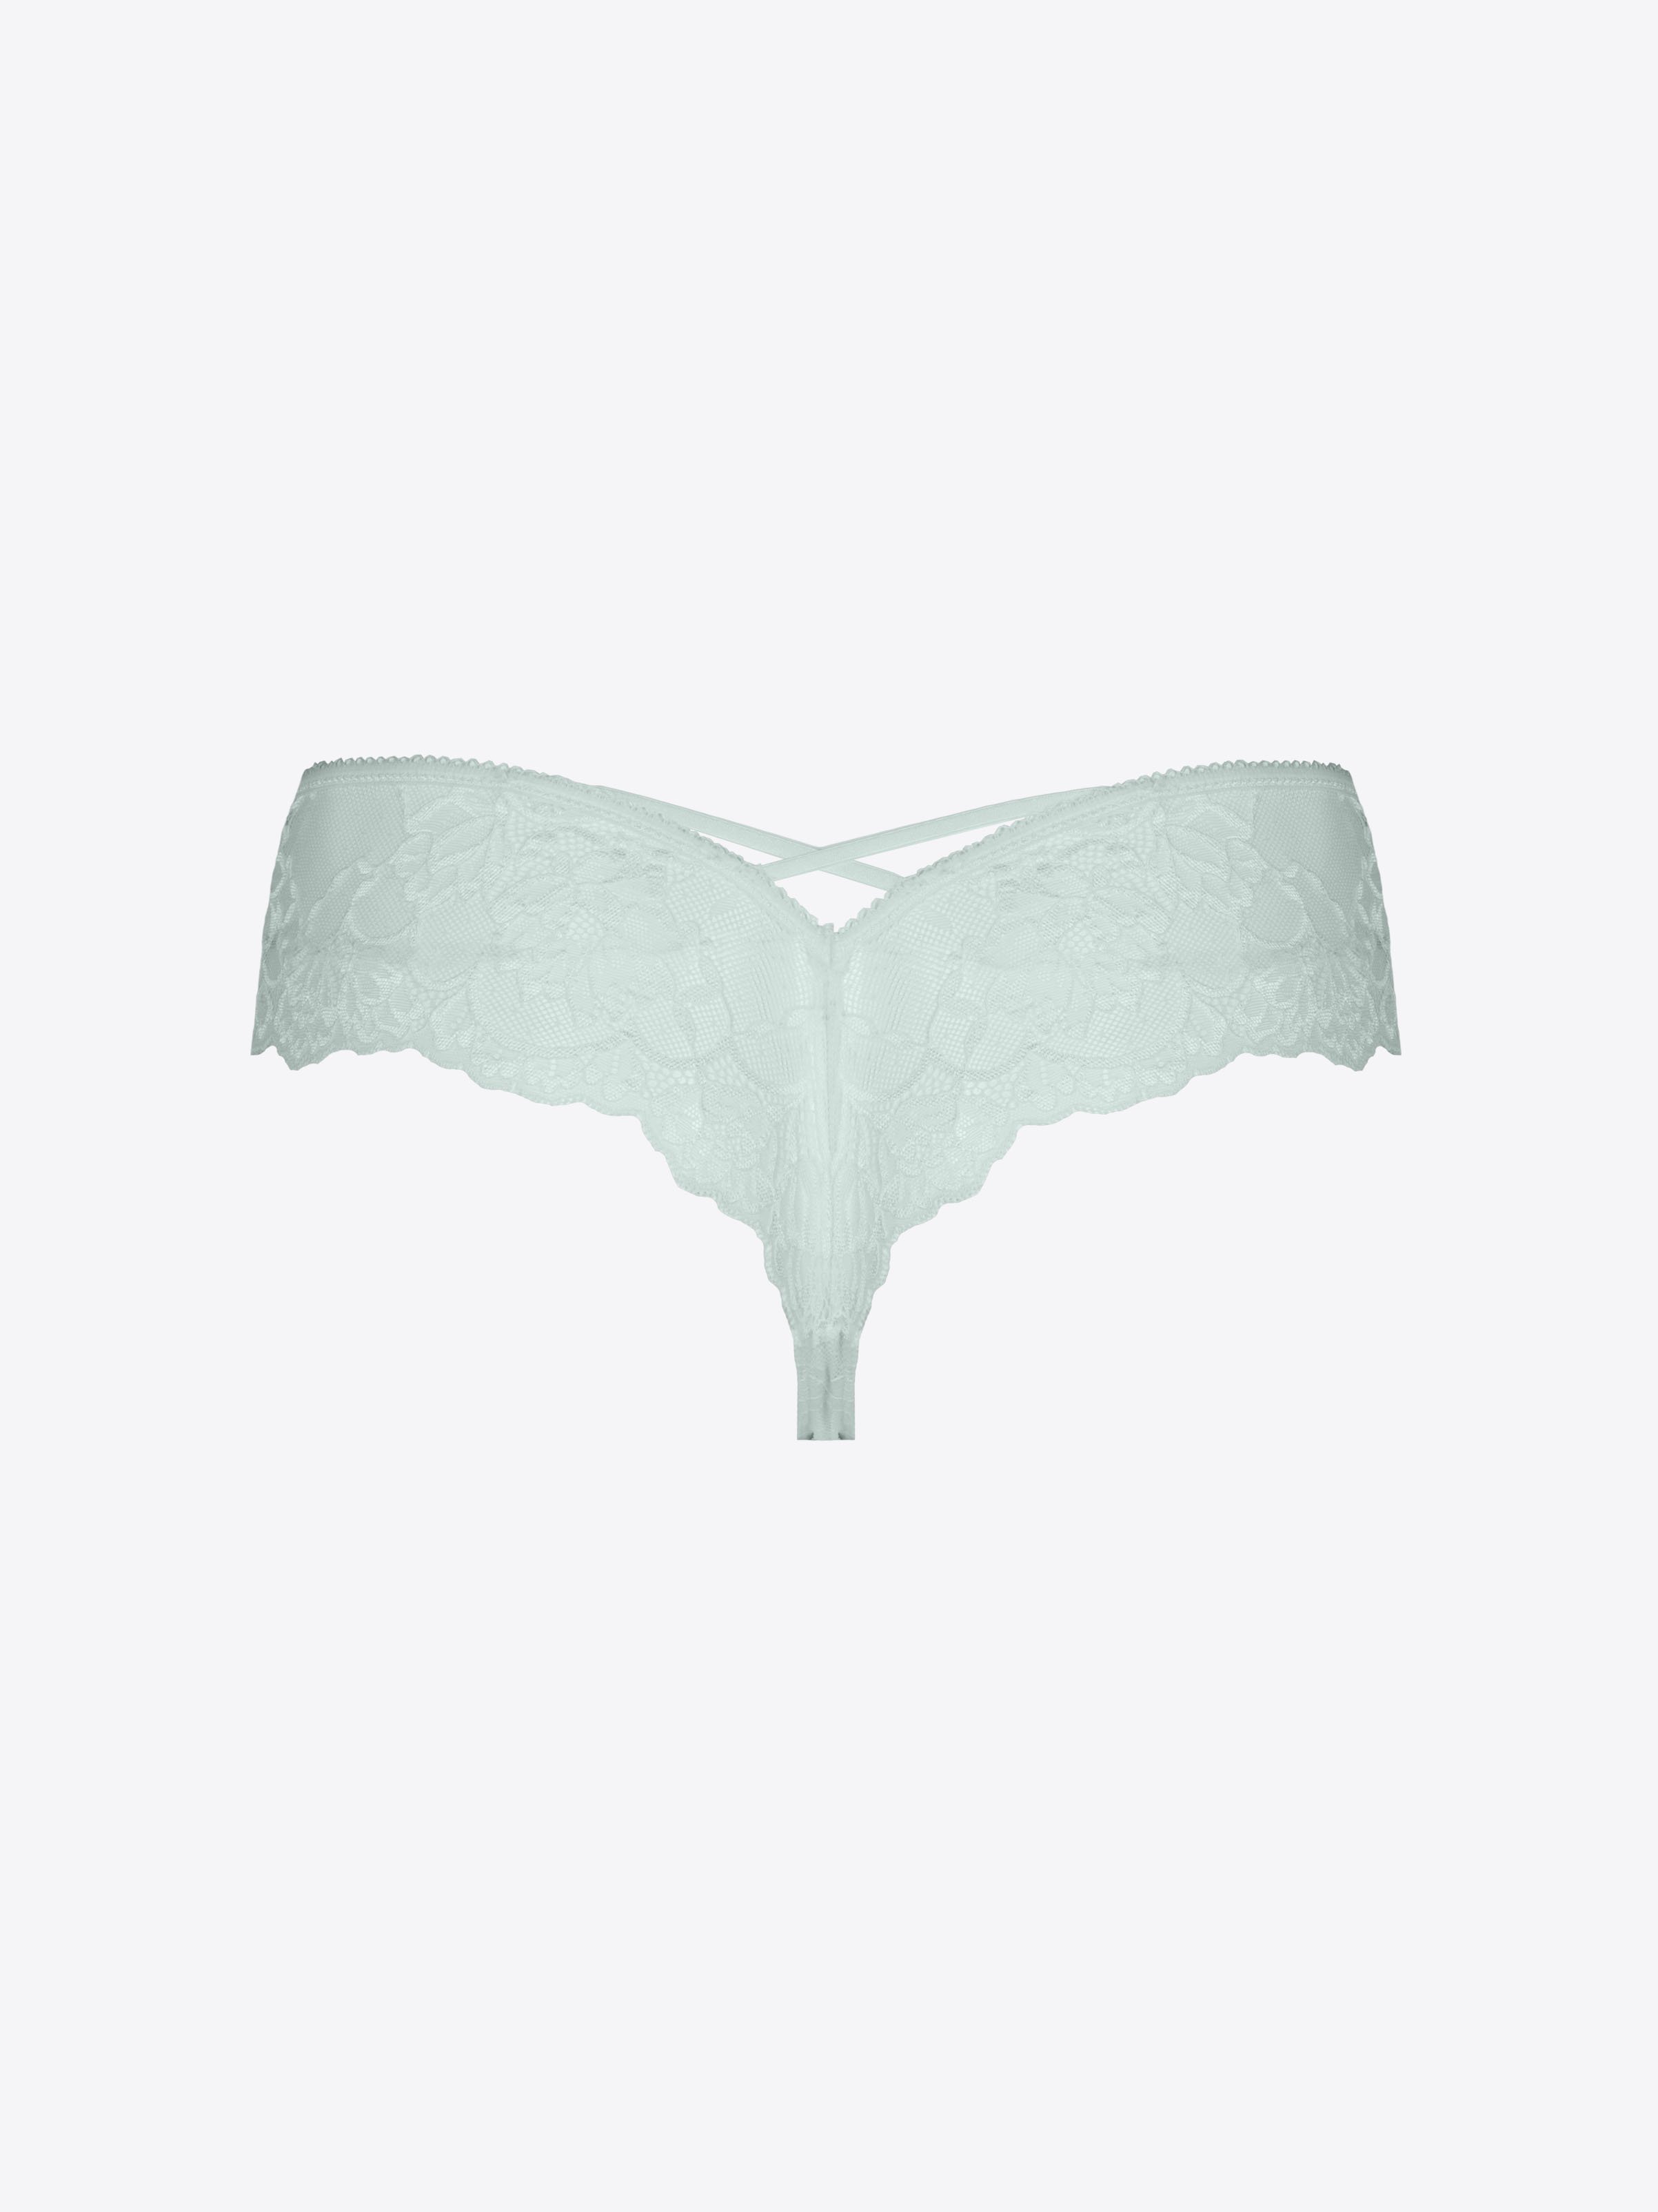 Avery Hipster Thong - Subtle Green - CA$14.75 - CHANGE Lingerie